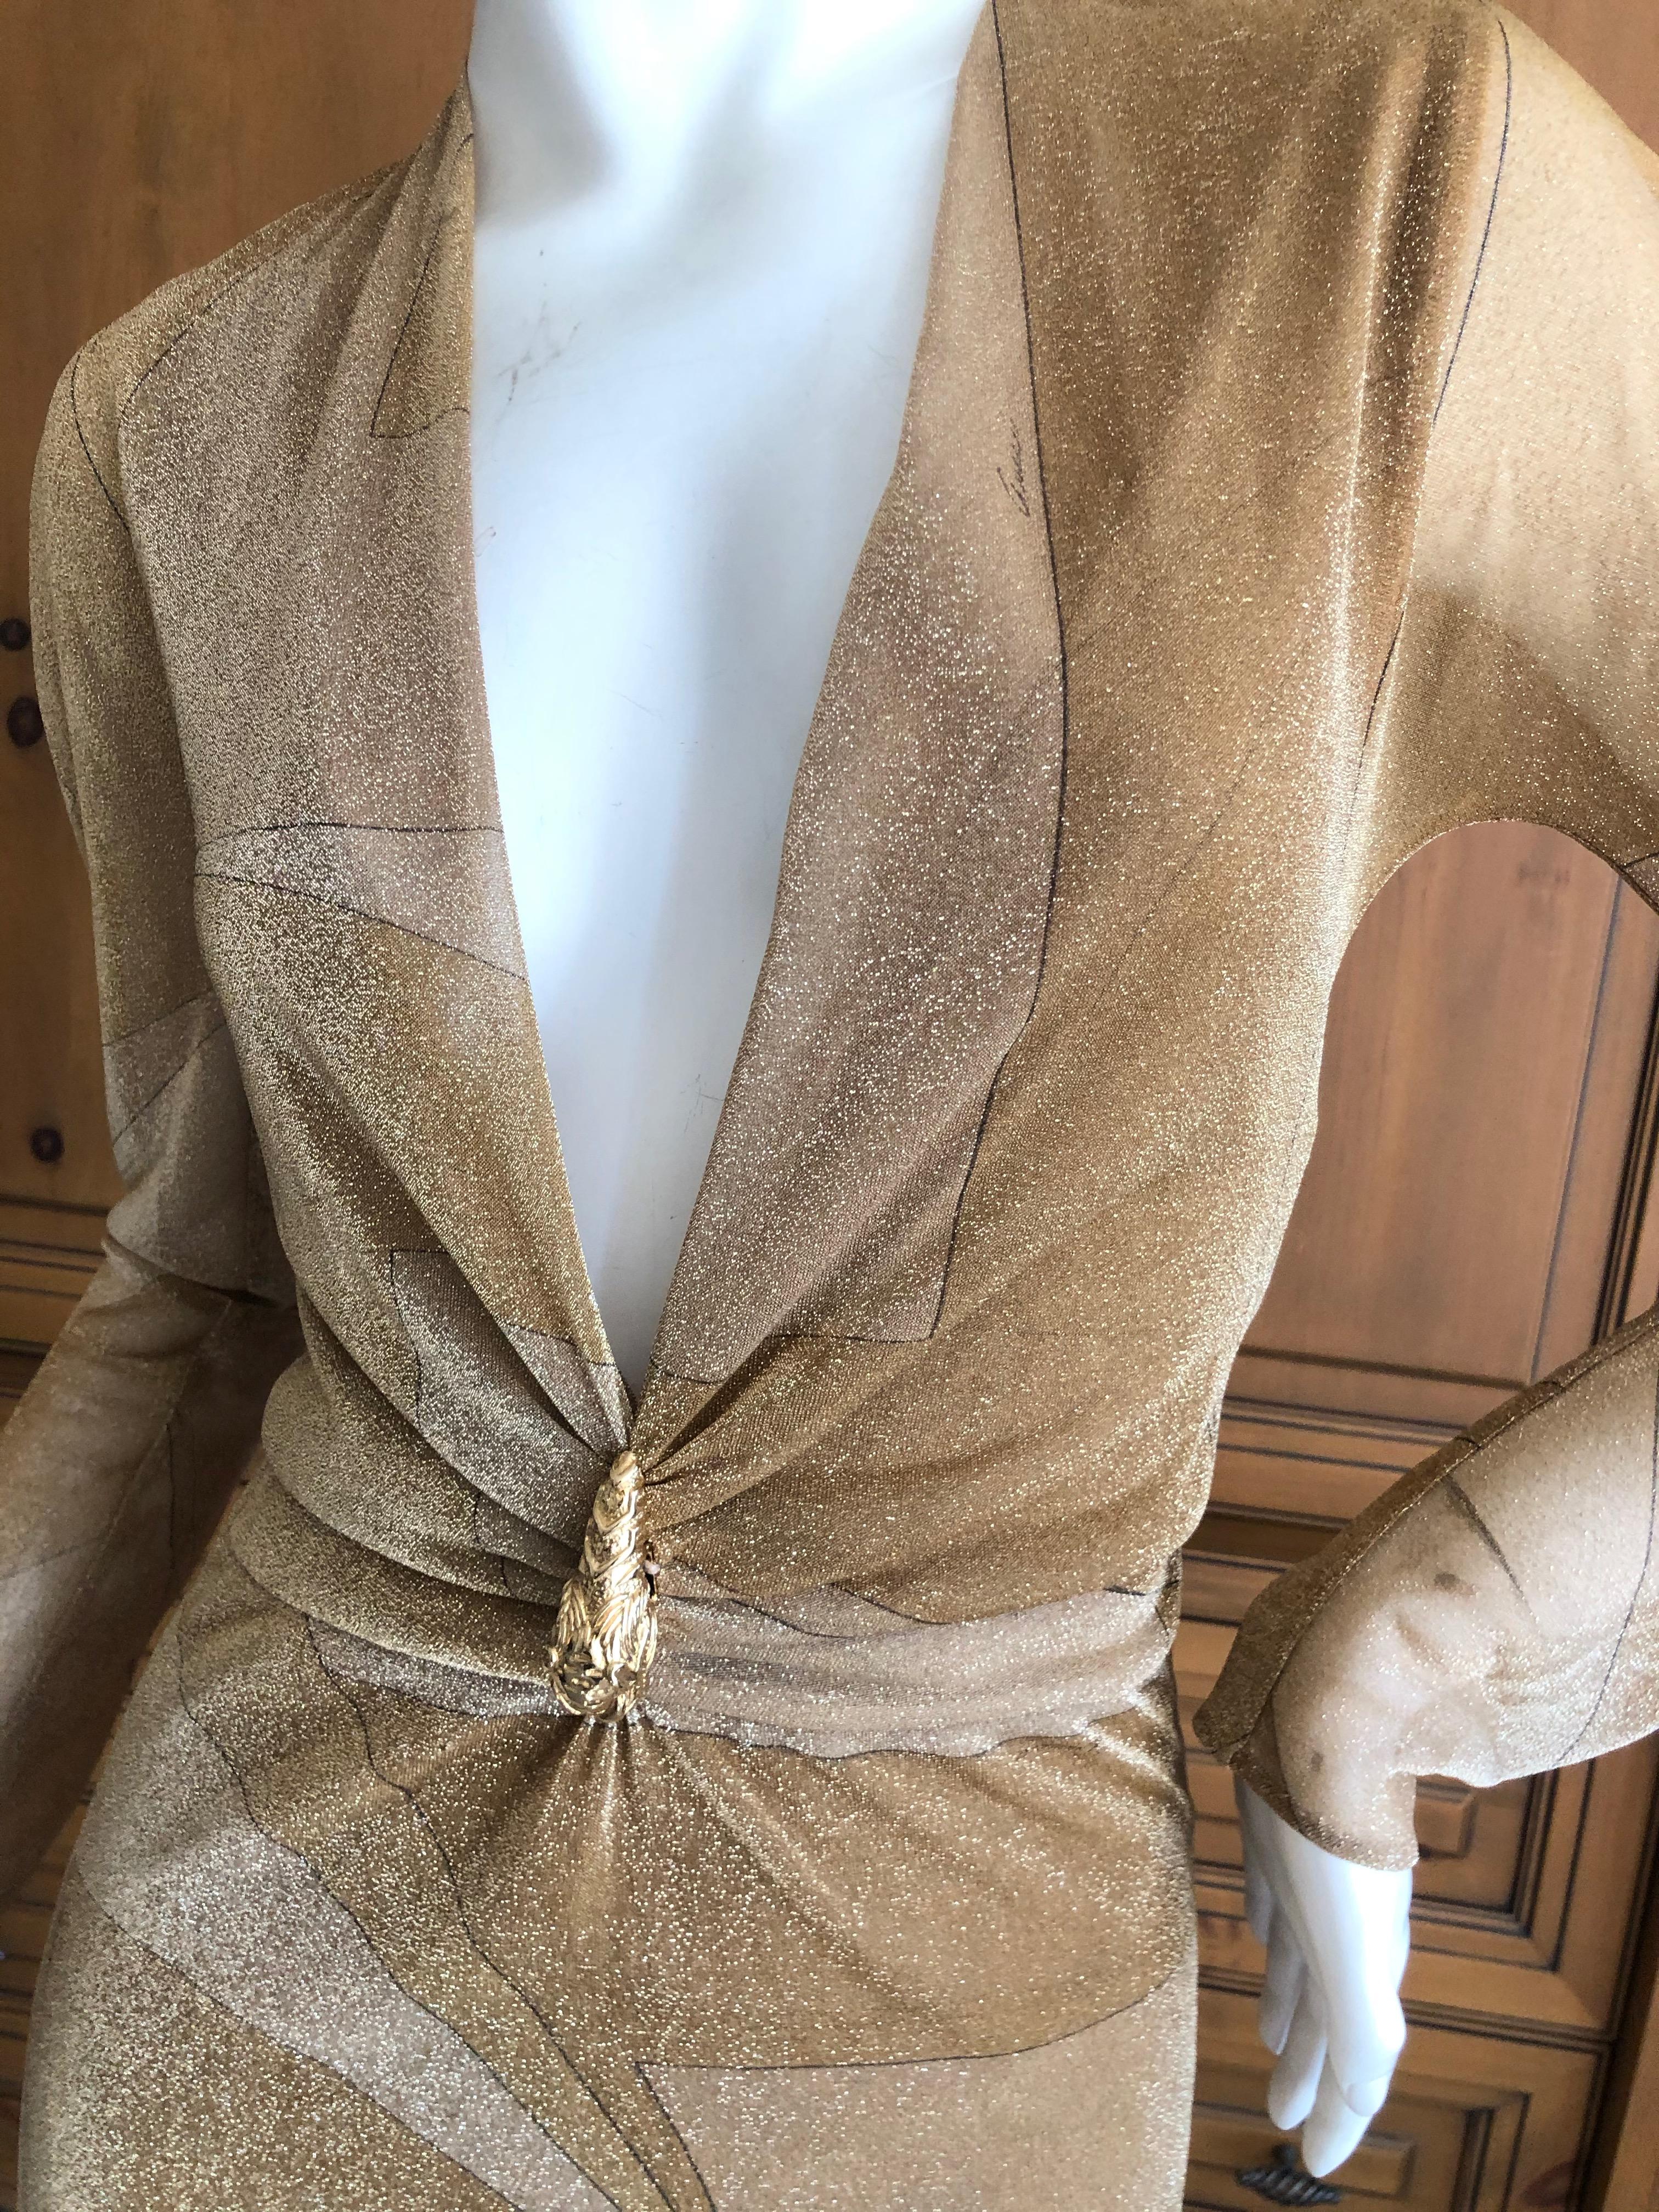 Gucci by Tom Ford Low Cut Gold Dress with Dragon Detail In Excellent Condition For Sale In Cloverdale, CA